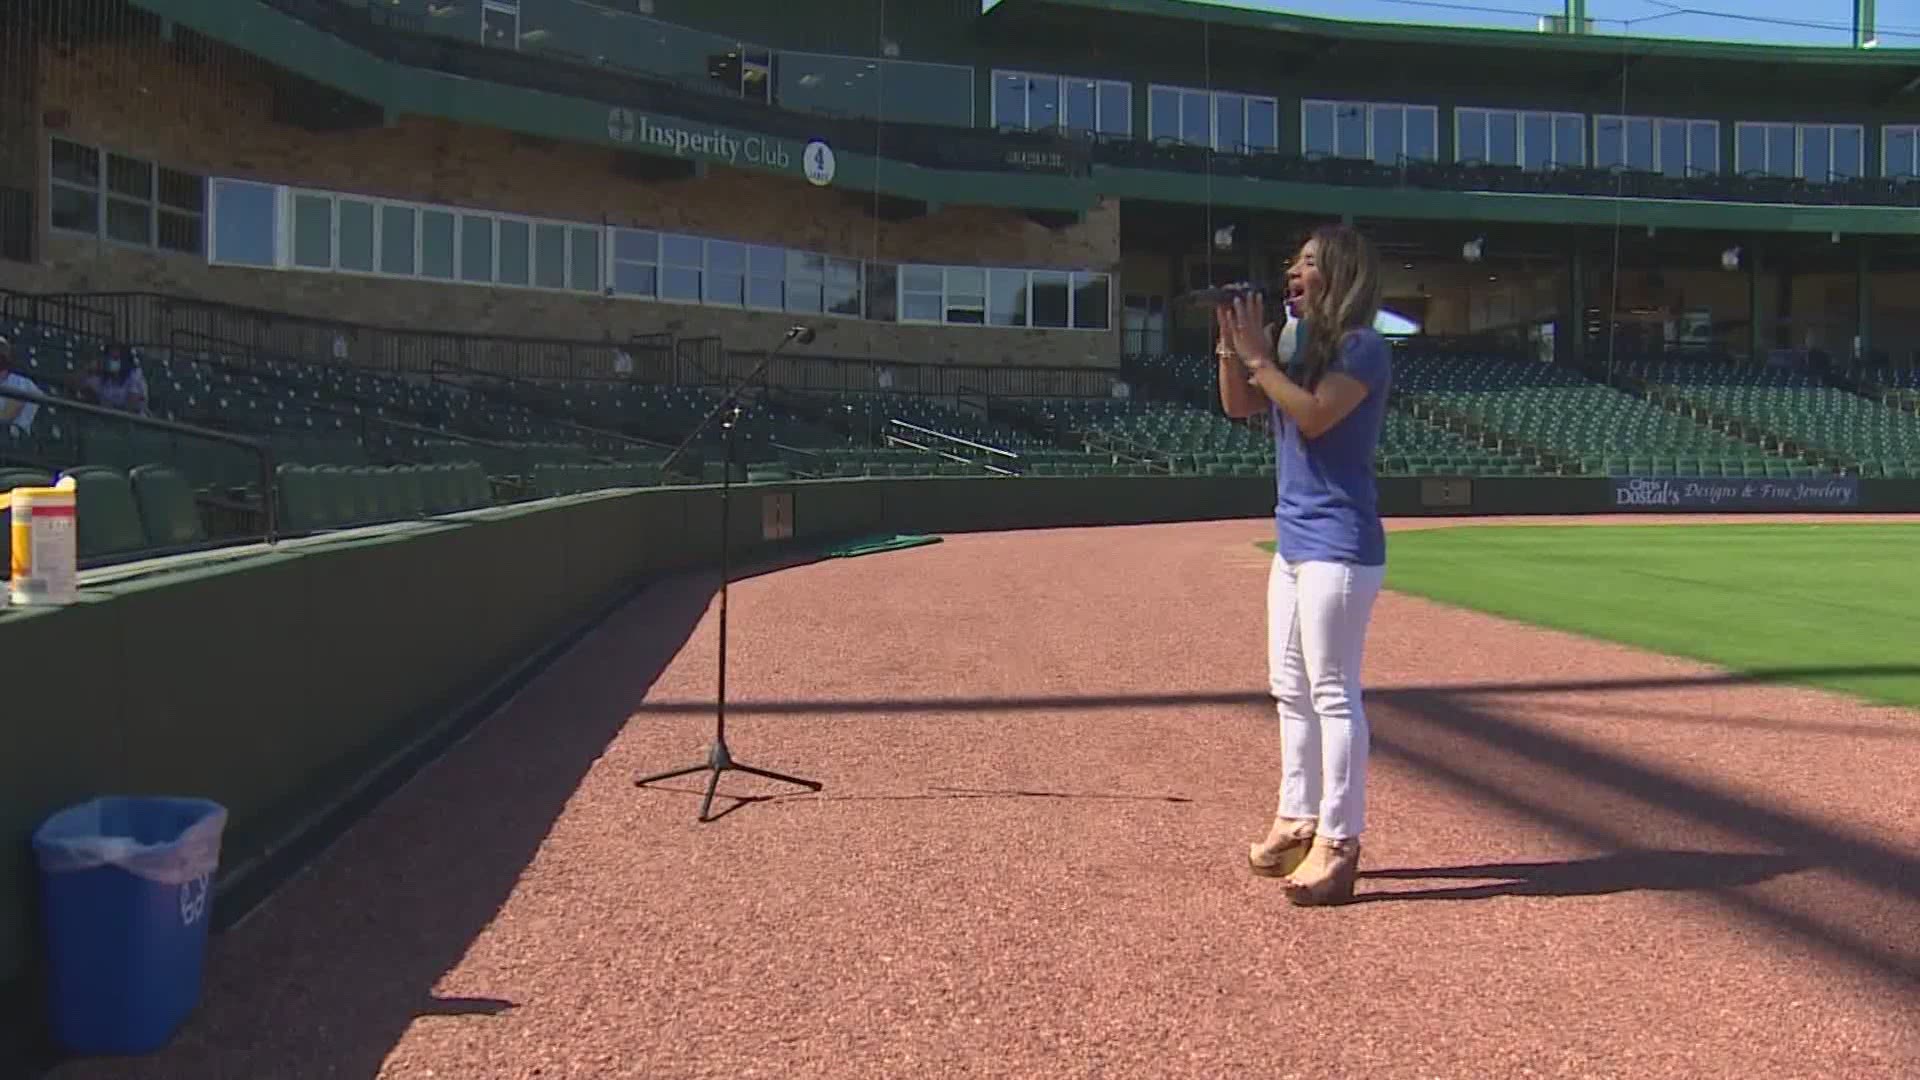 Dozens of singers showed up to show off their skills in hopes of being picked to sing the nation's song at Constellation Field this year.